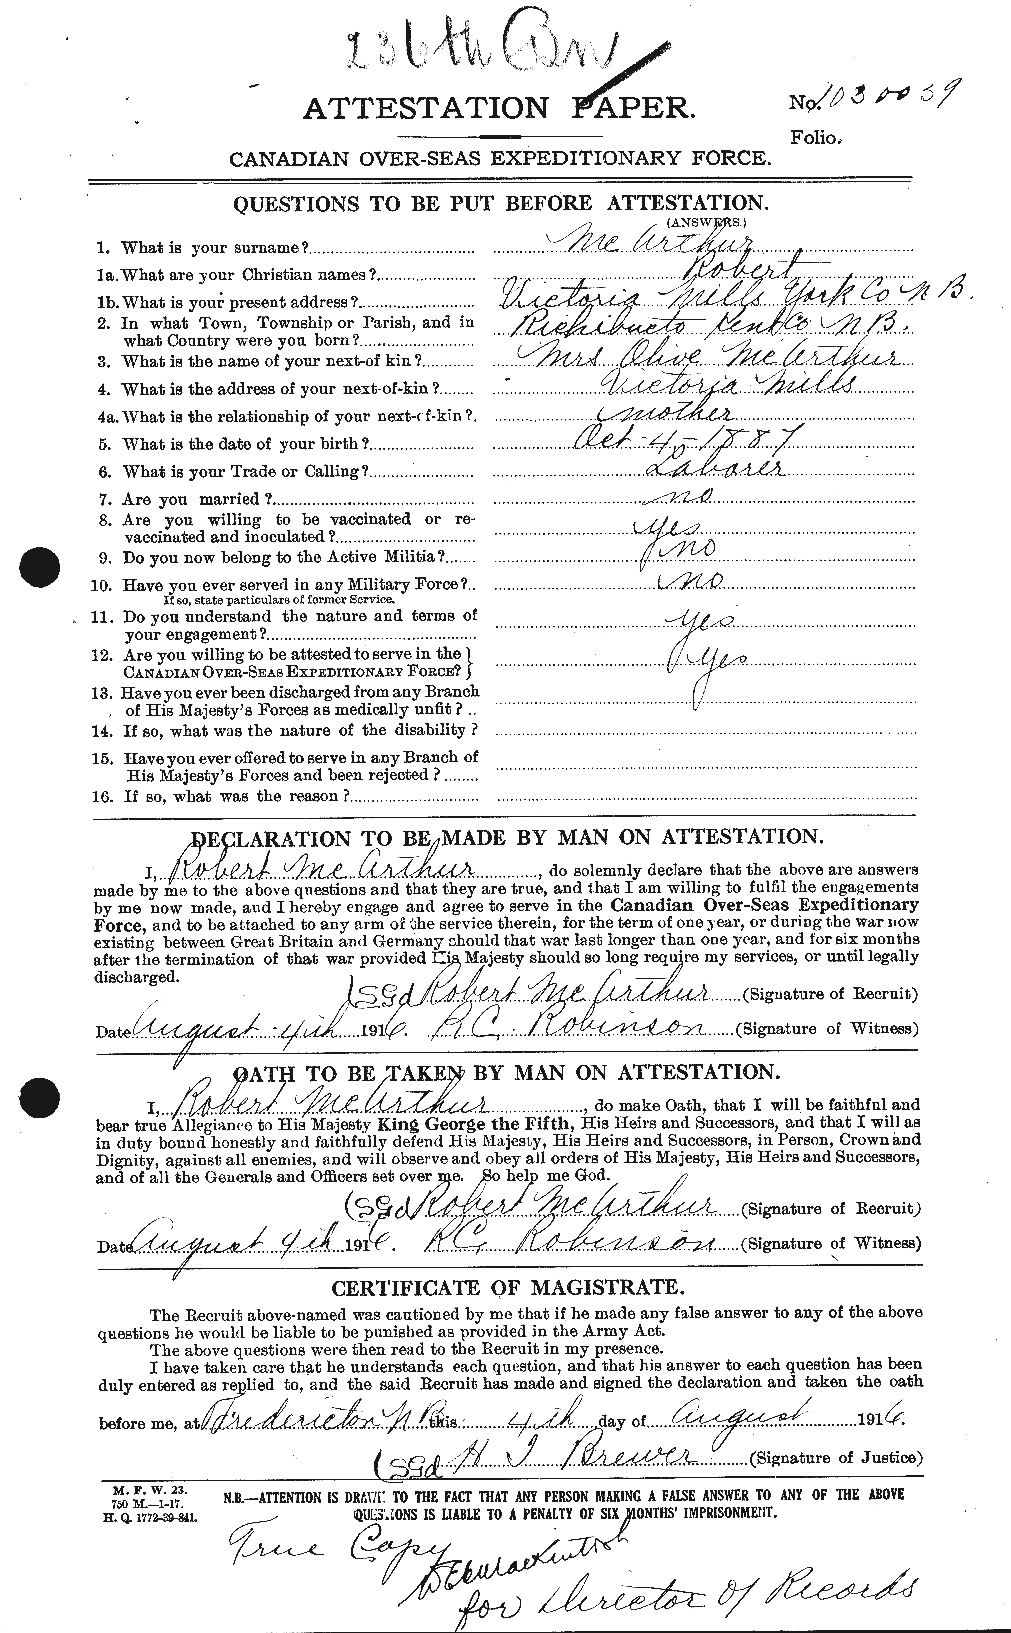 Personnel Records of the First World War - CEF 130667a